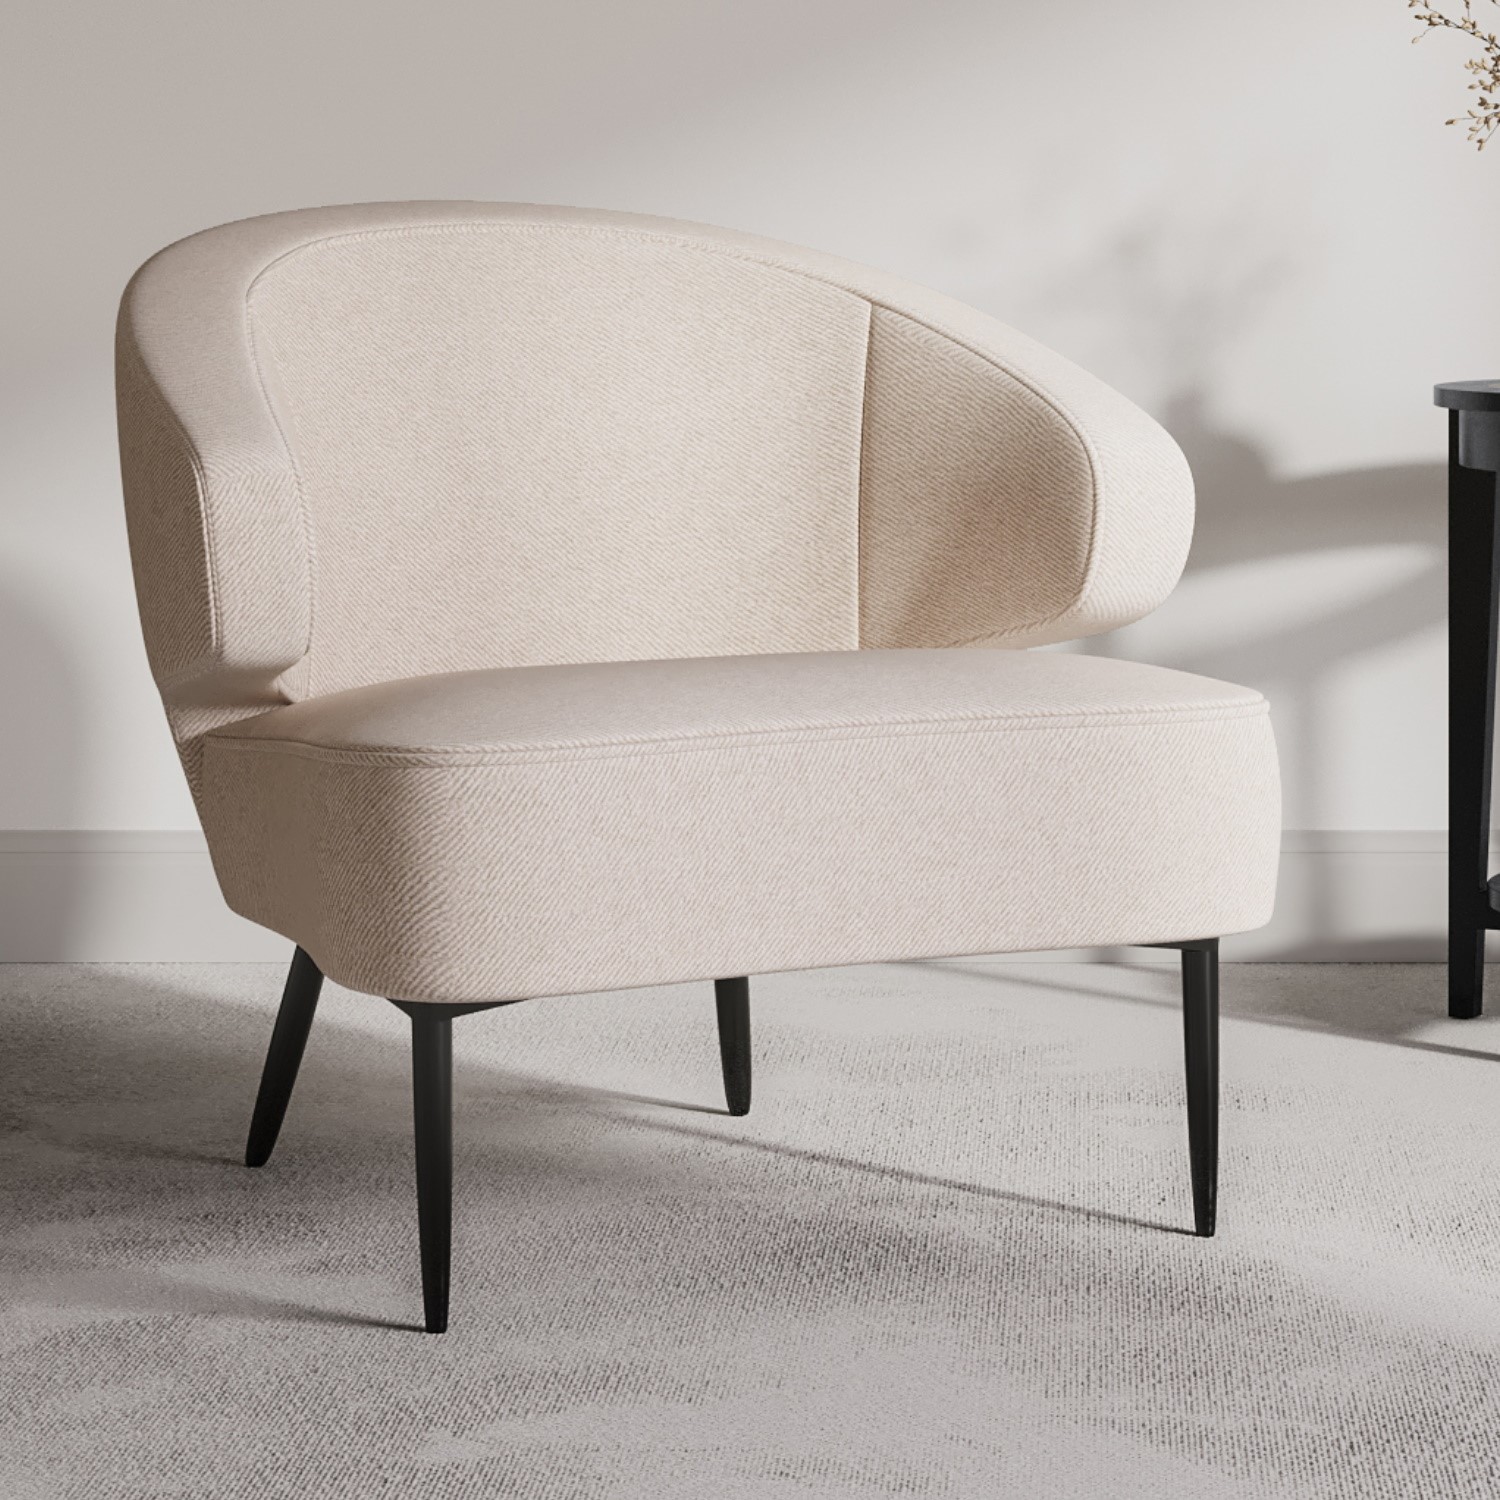 Read more about Beige fabric armchair with black metal legs tyler